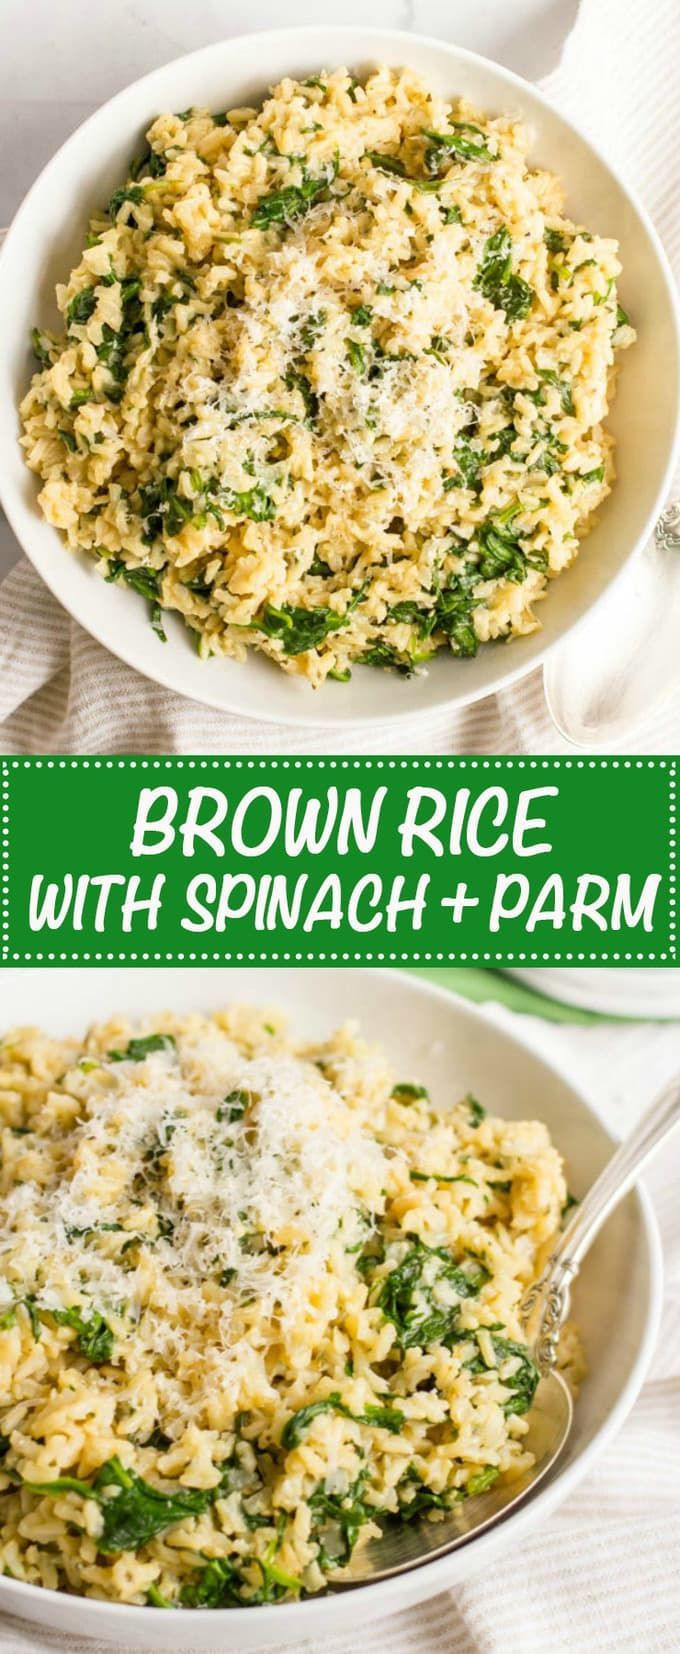 Healthy Rice Side Dishes
 Best 25 Brown rice ideas on Pinterest